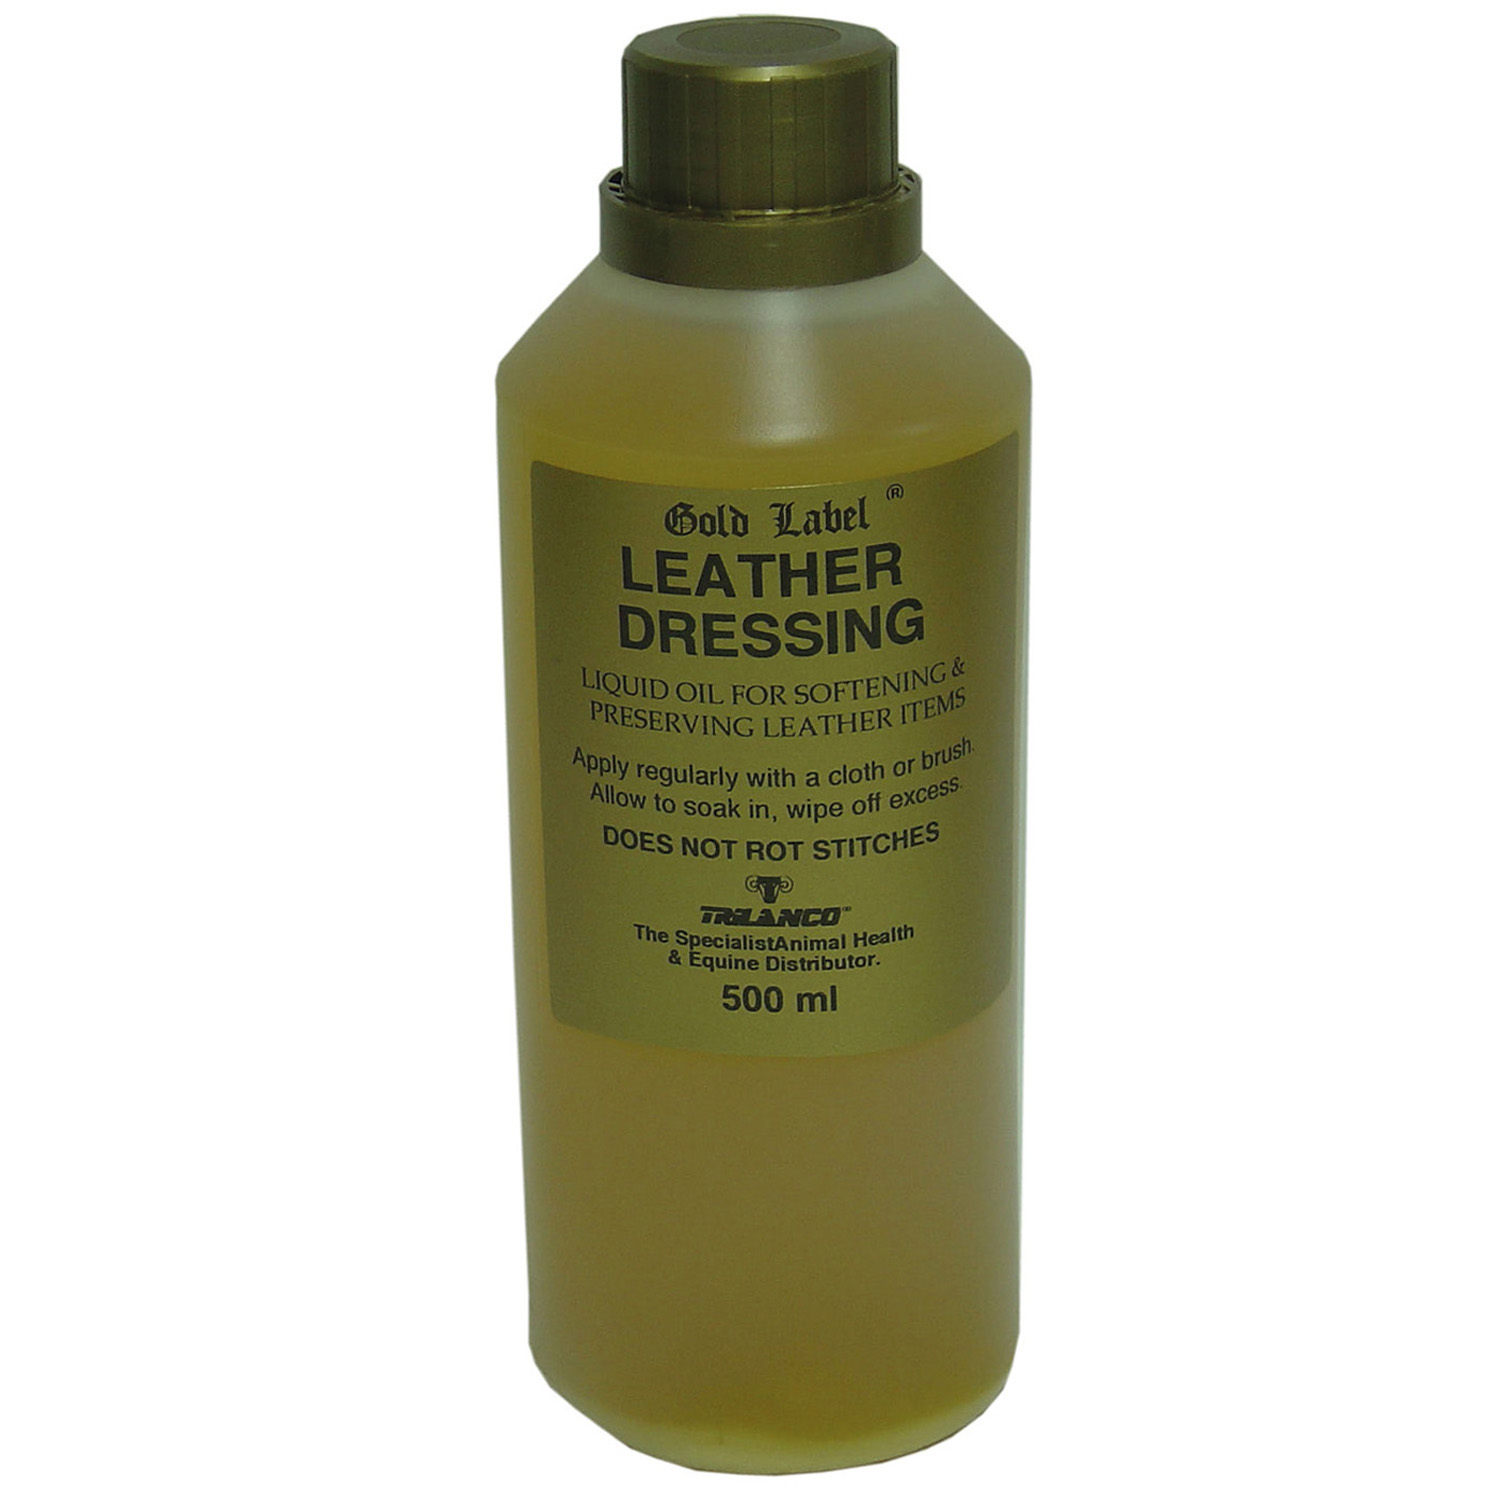 GOLD LABEL LEATHER DRESSING 500 ML 500 ML